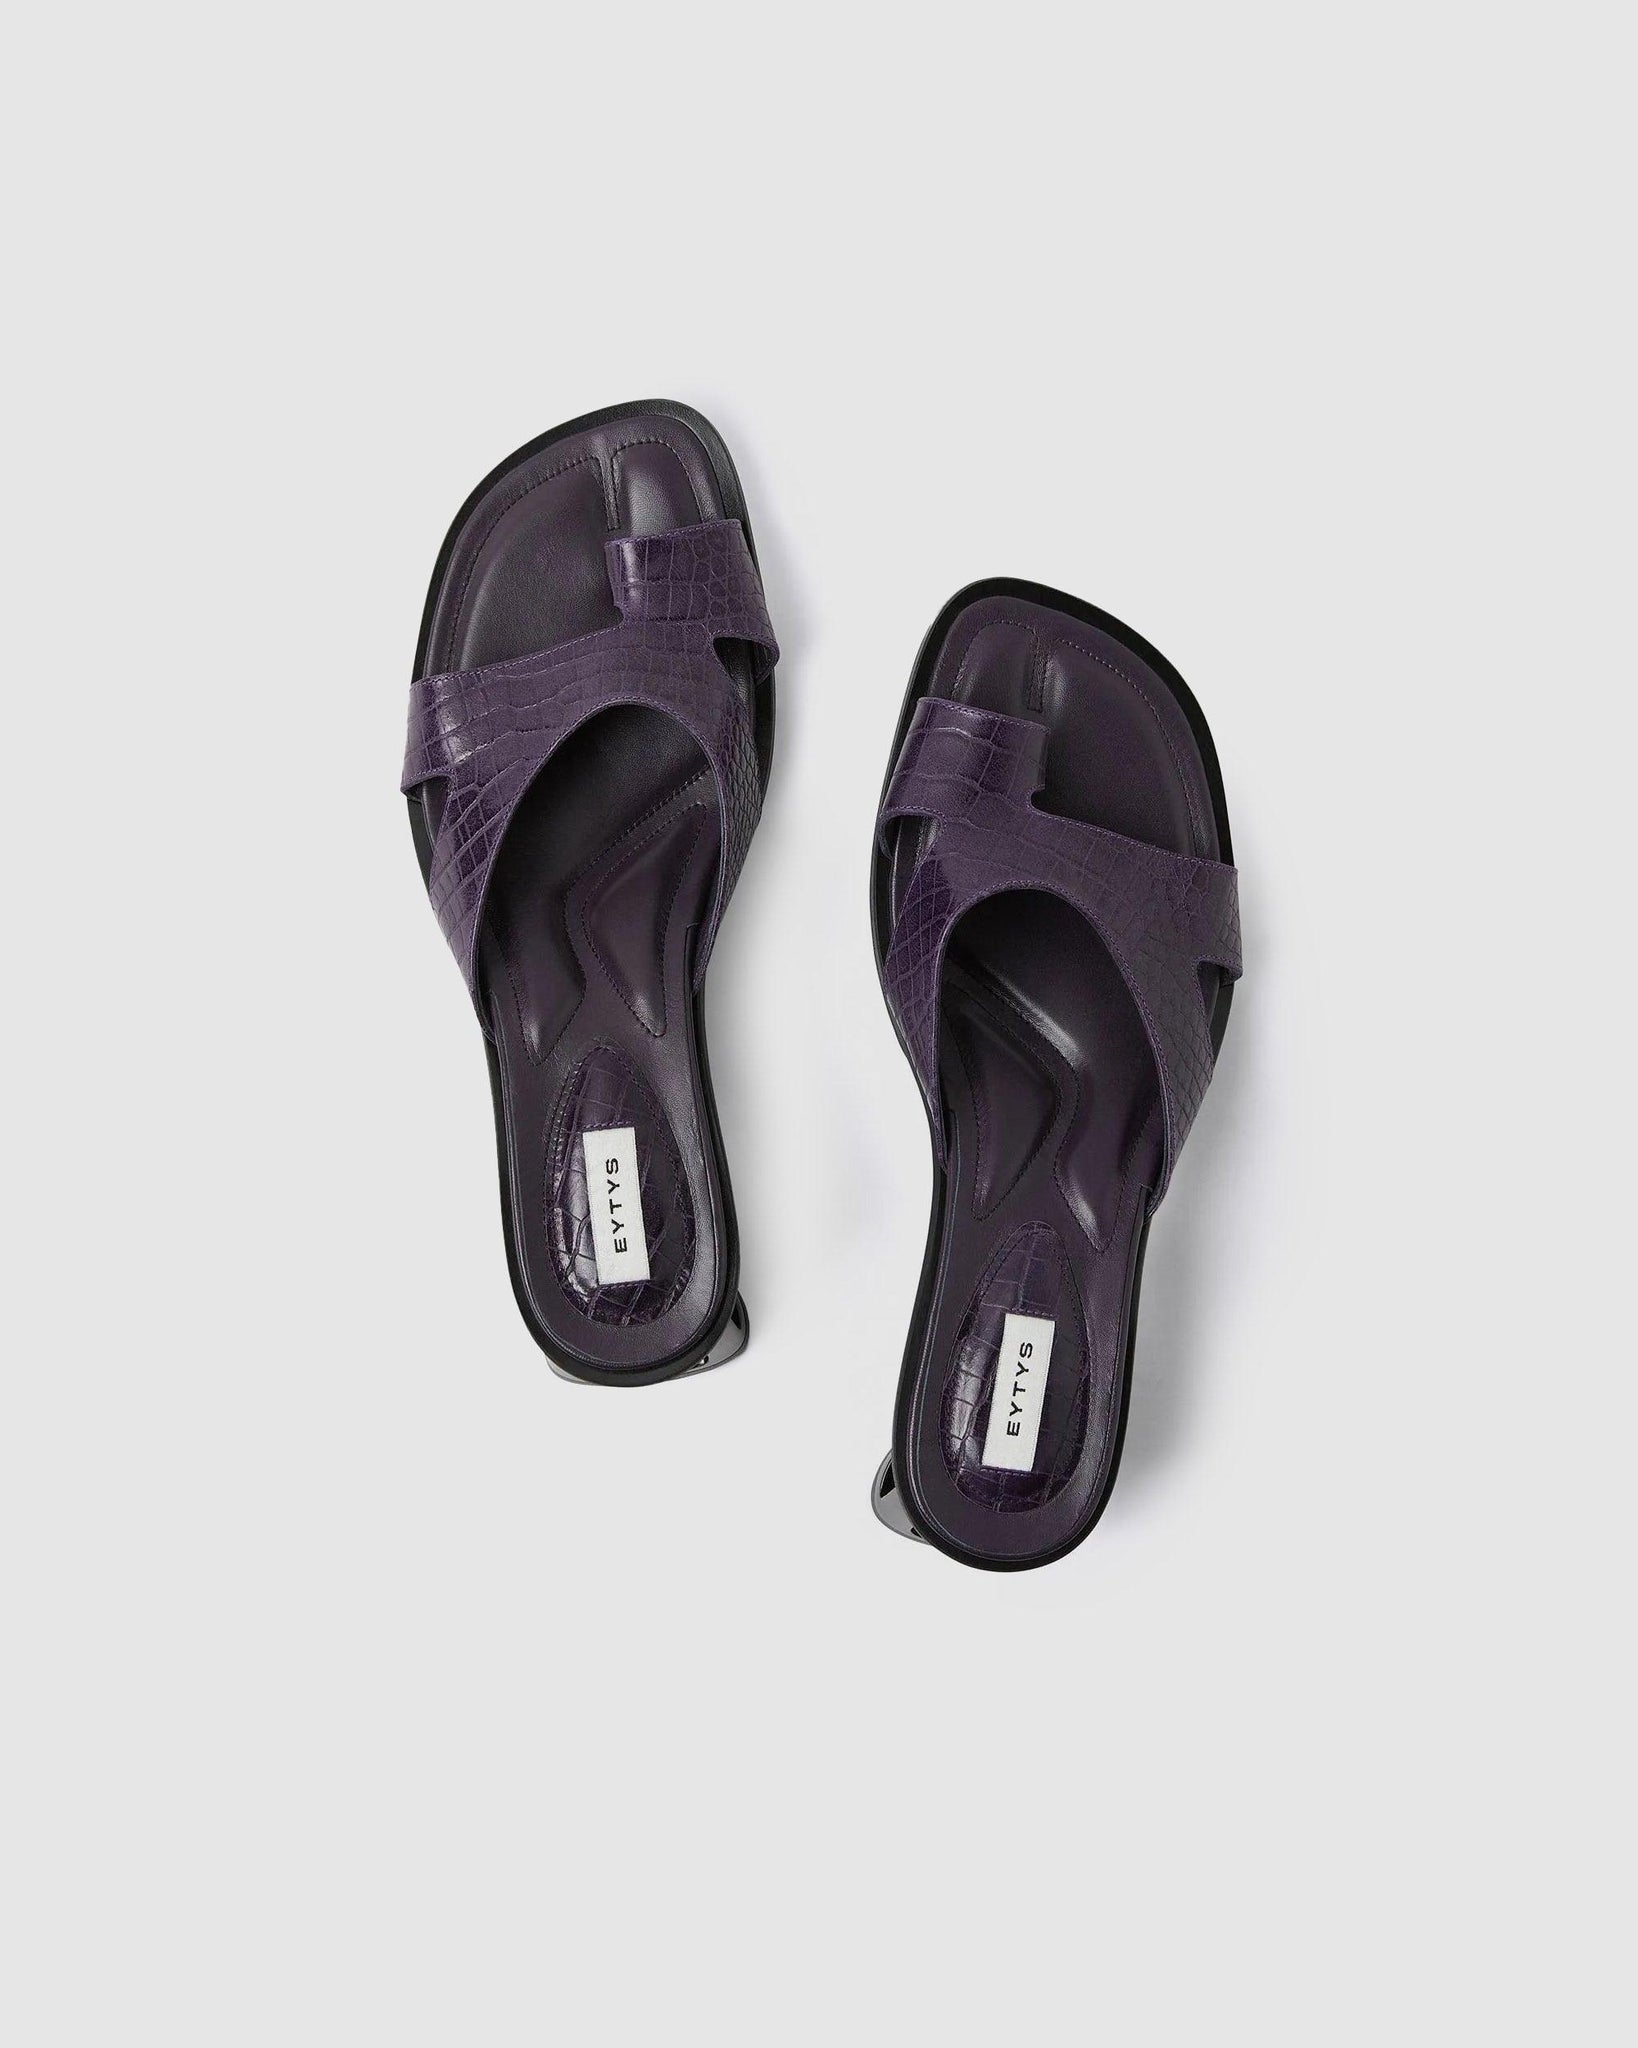 Aubergine Ava Heels - {{ collection.title }} - Chinatown Country Club 